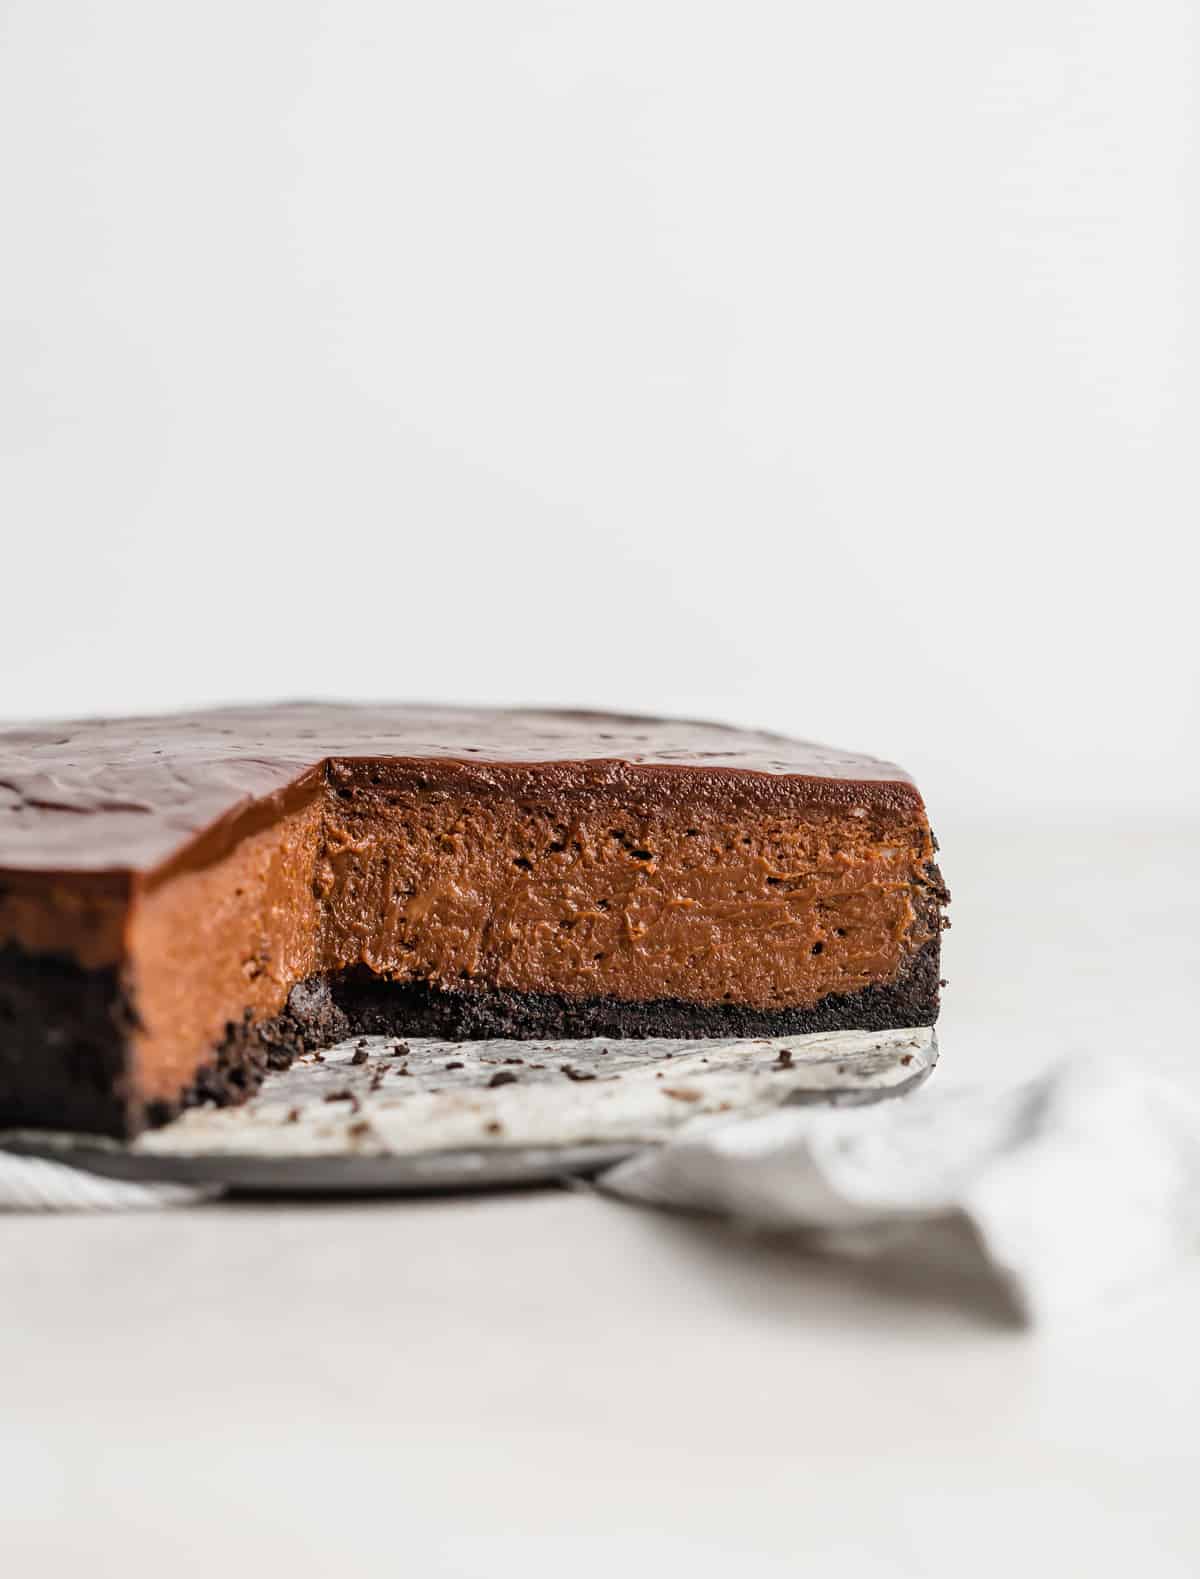 A Nutella Cheesecake with a slice removed, on a white background.